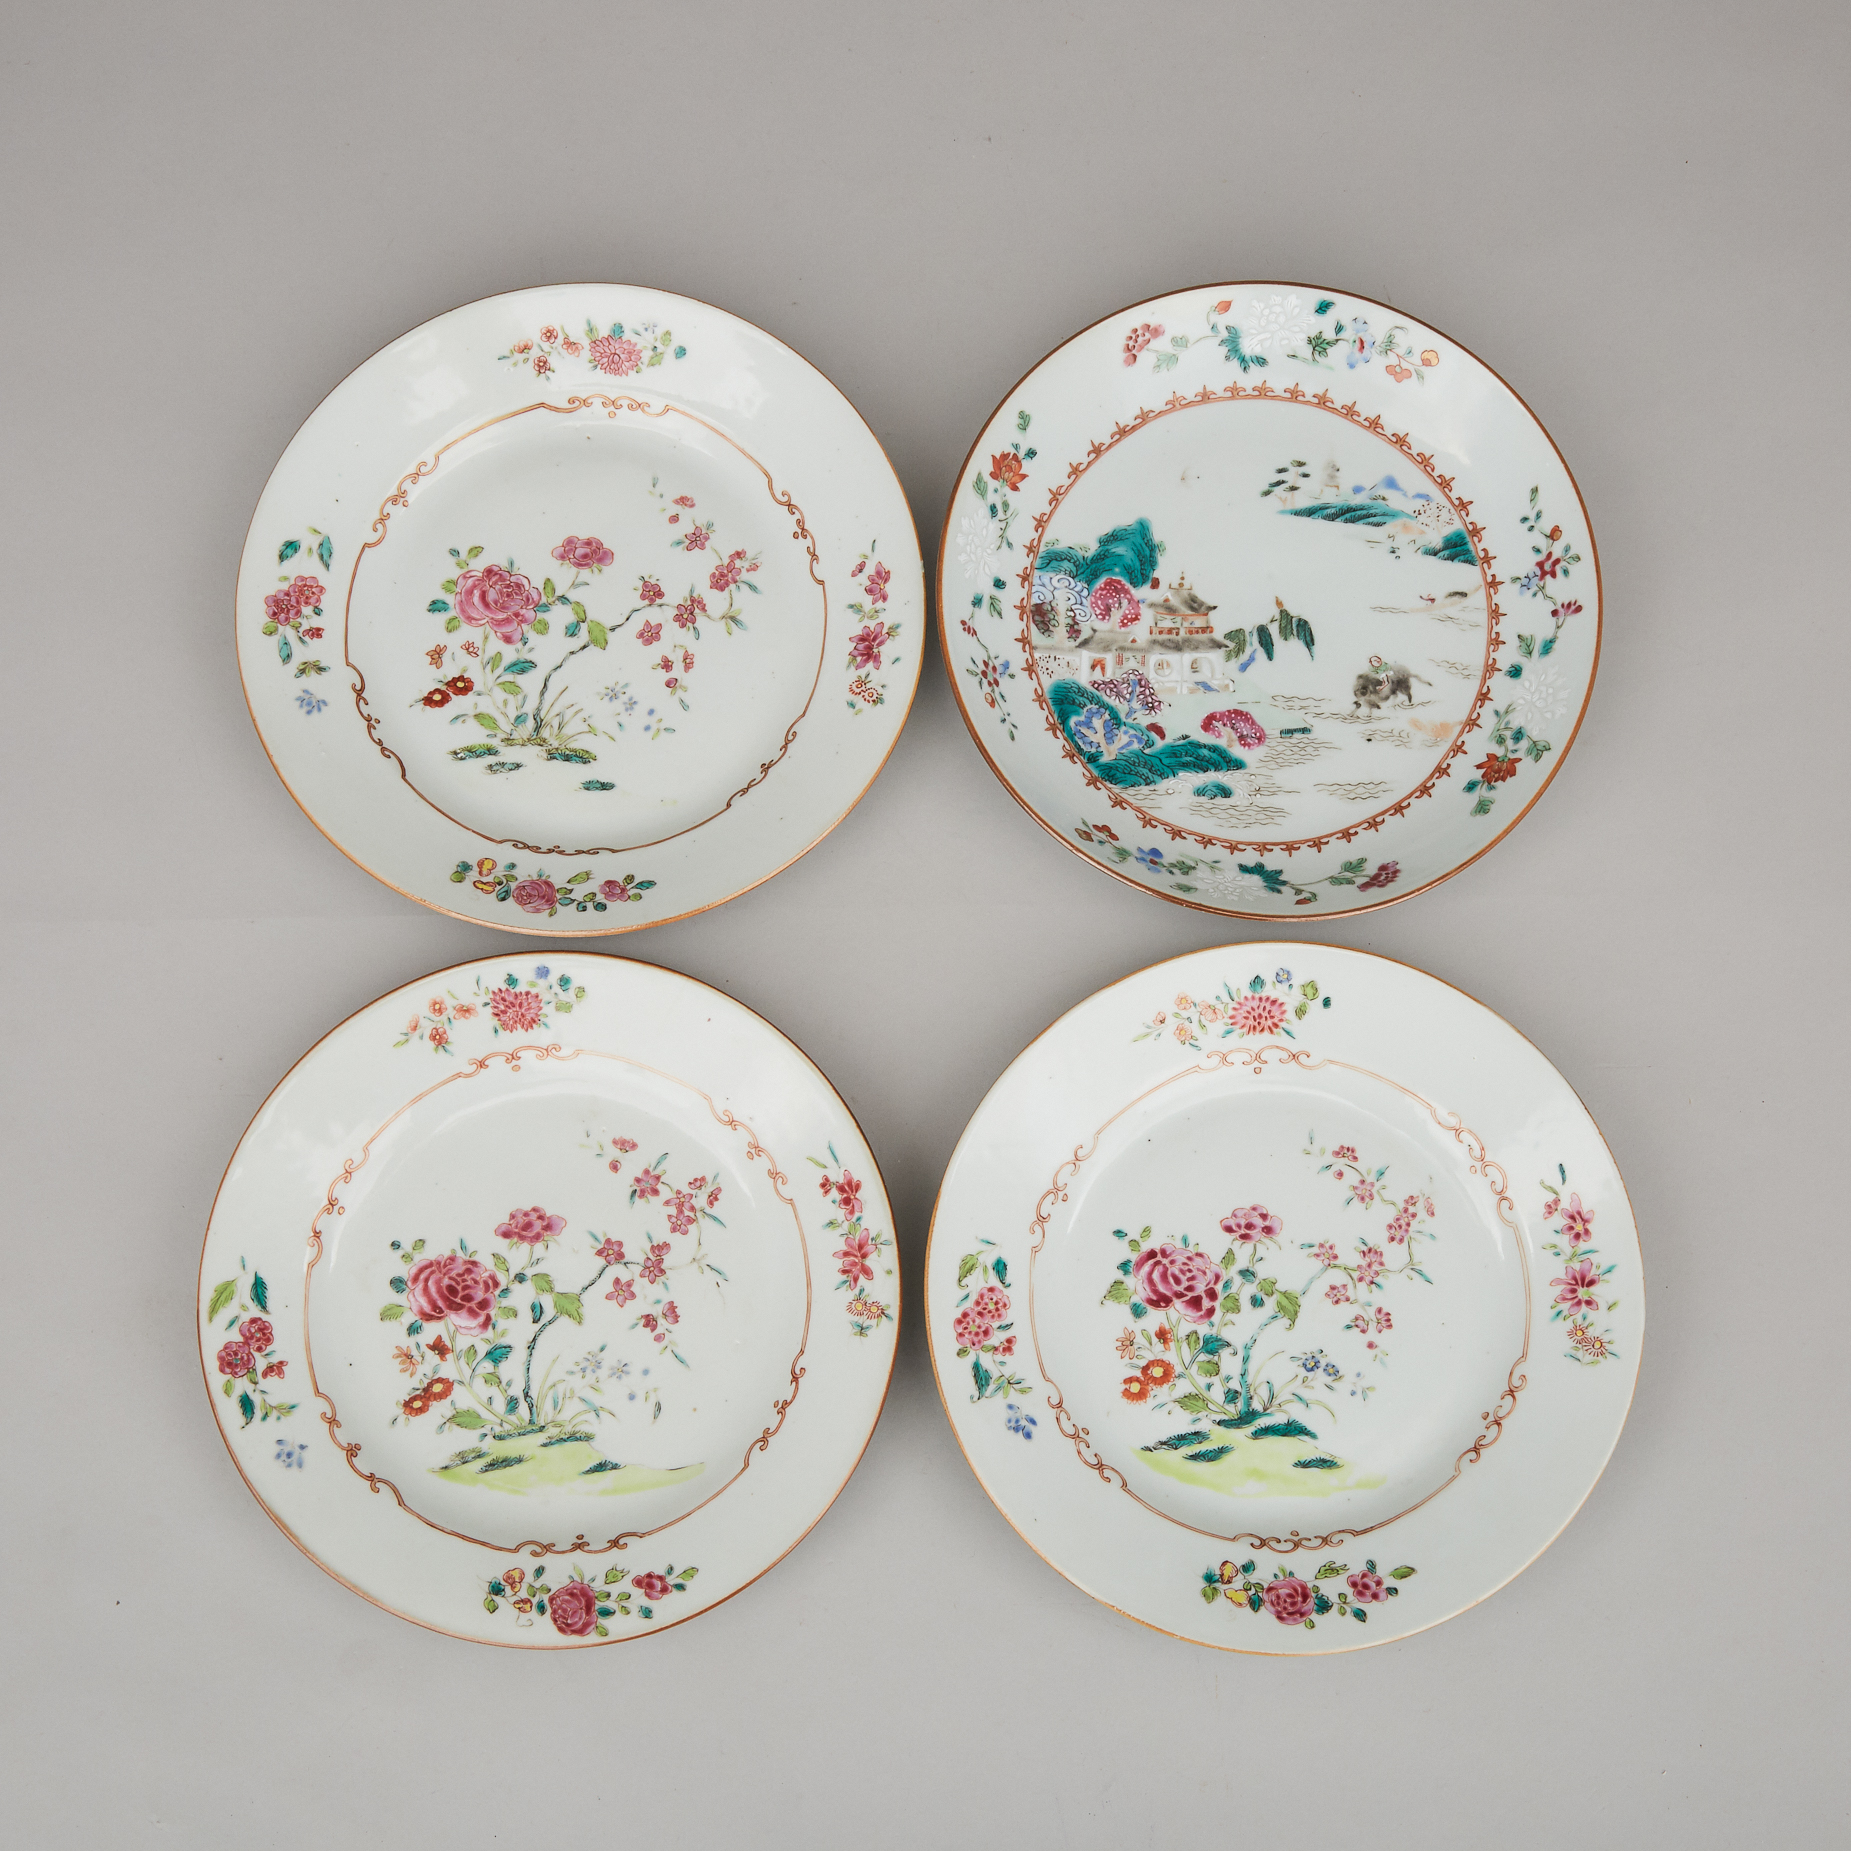 A Group of Four Chinese Export Porcelain Plates, 18th/19th Century